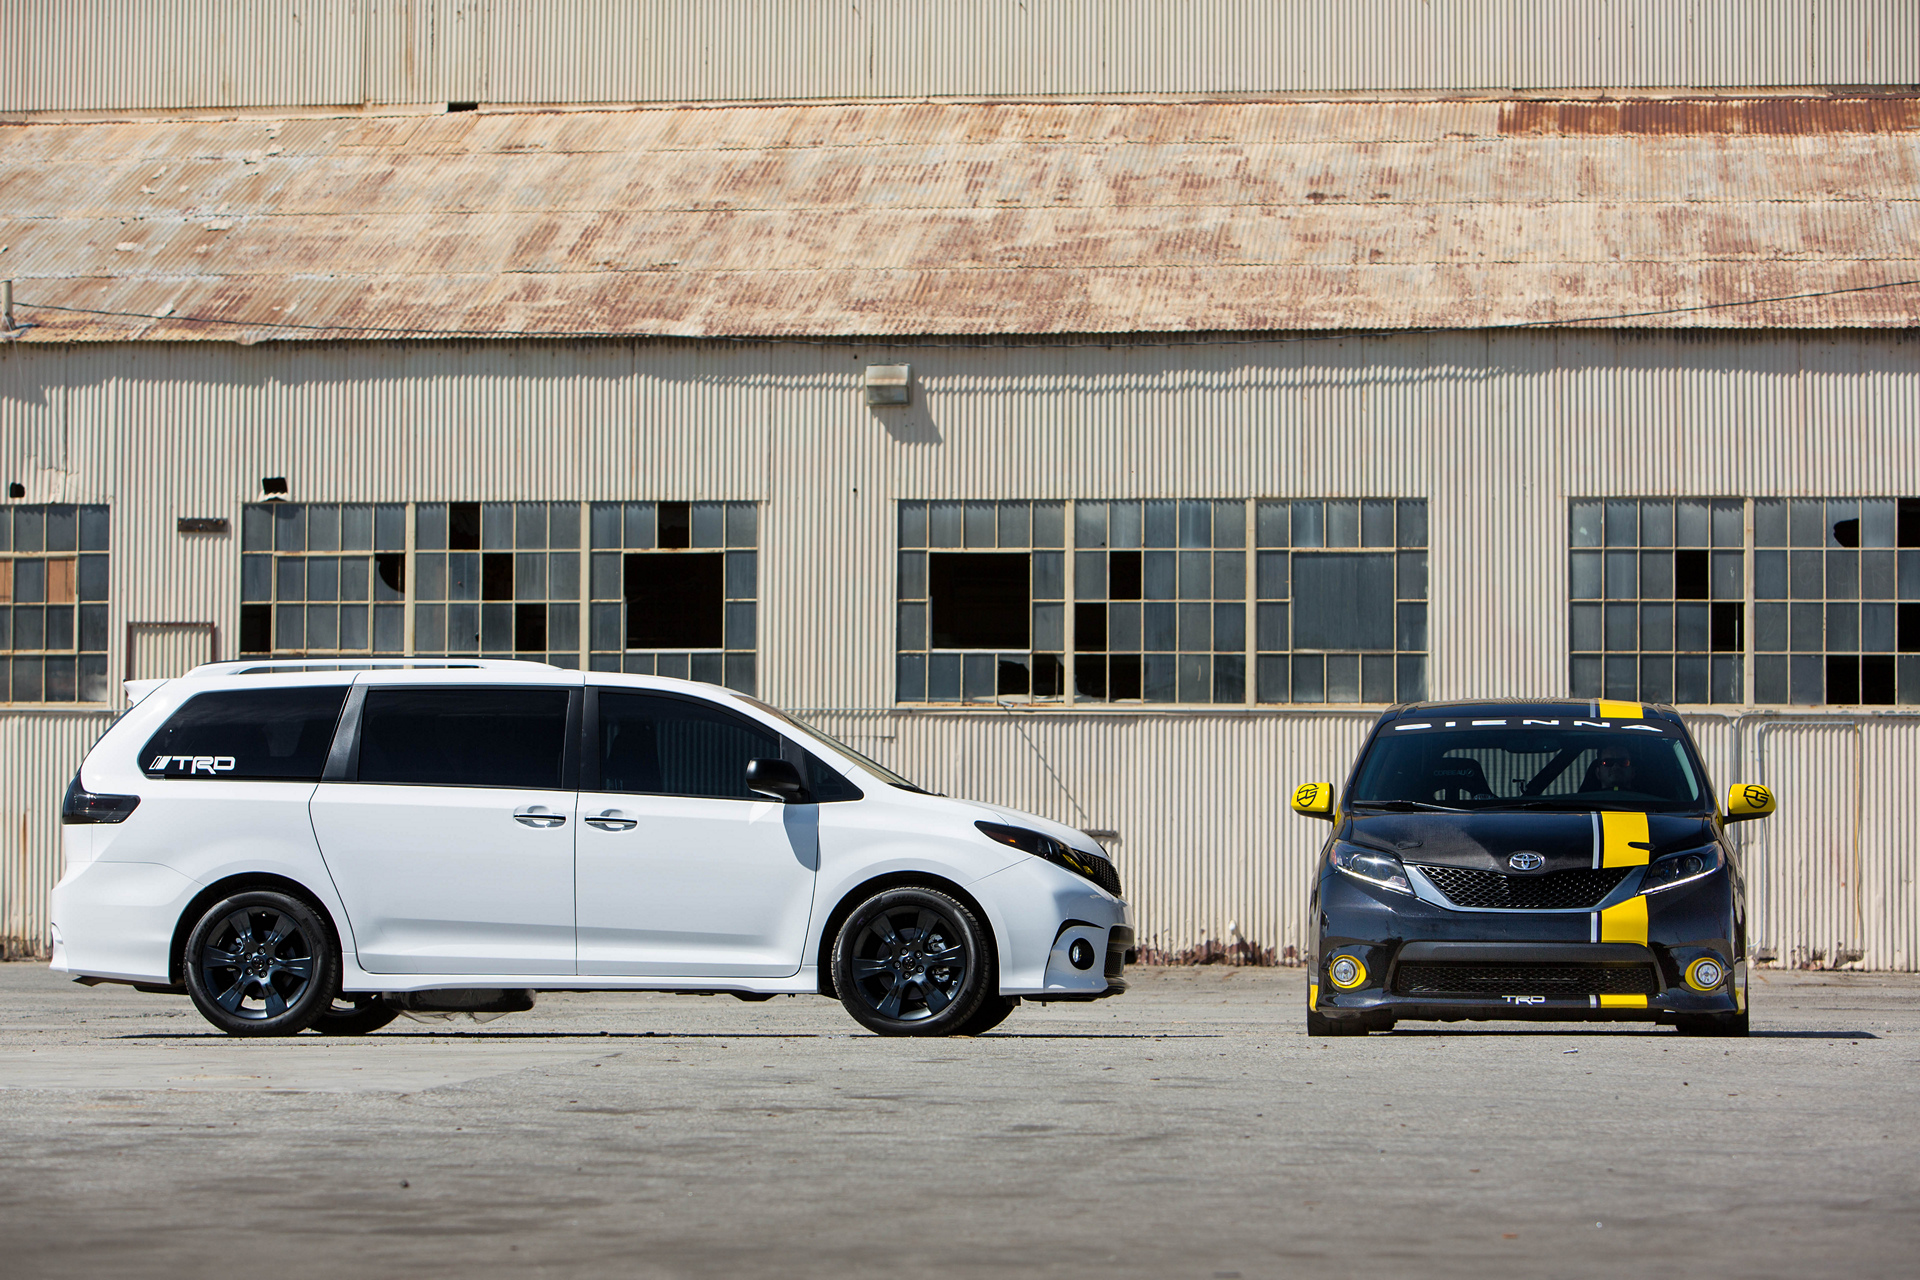 Toyota Sienna R-Tuned Concept and Toyota Sienna SE + Concept © Toyota Motor Corporation